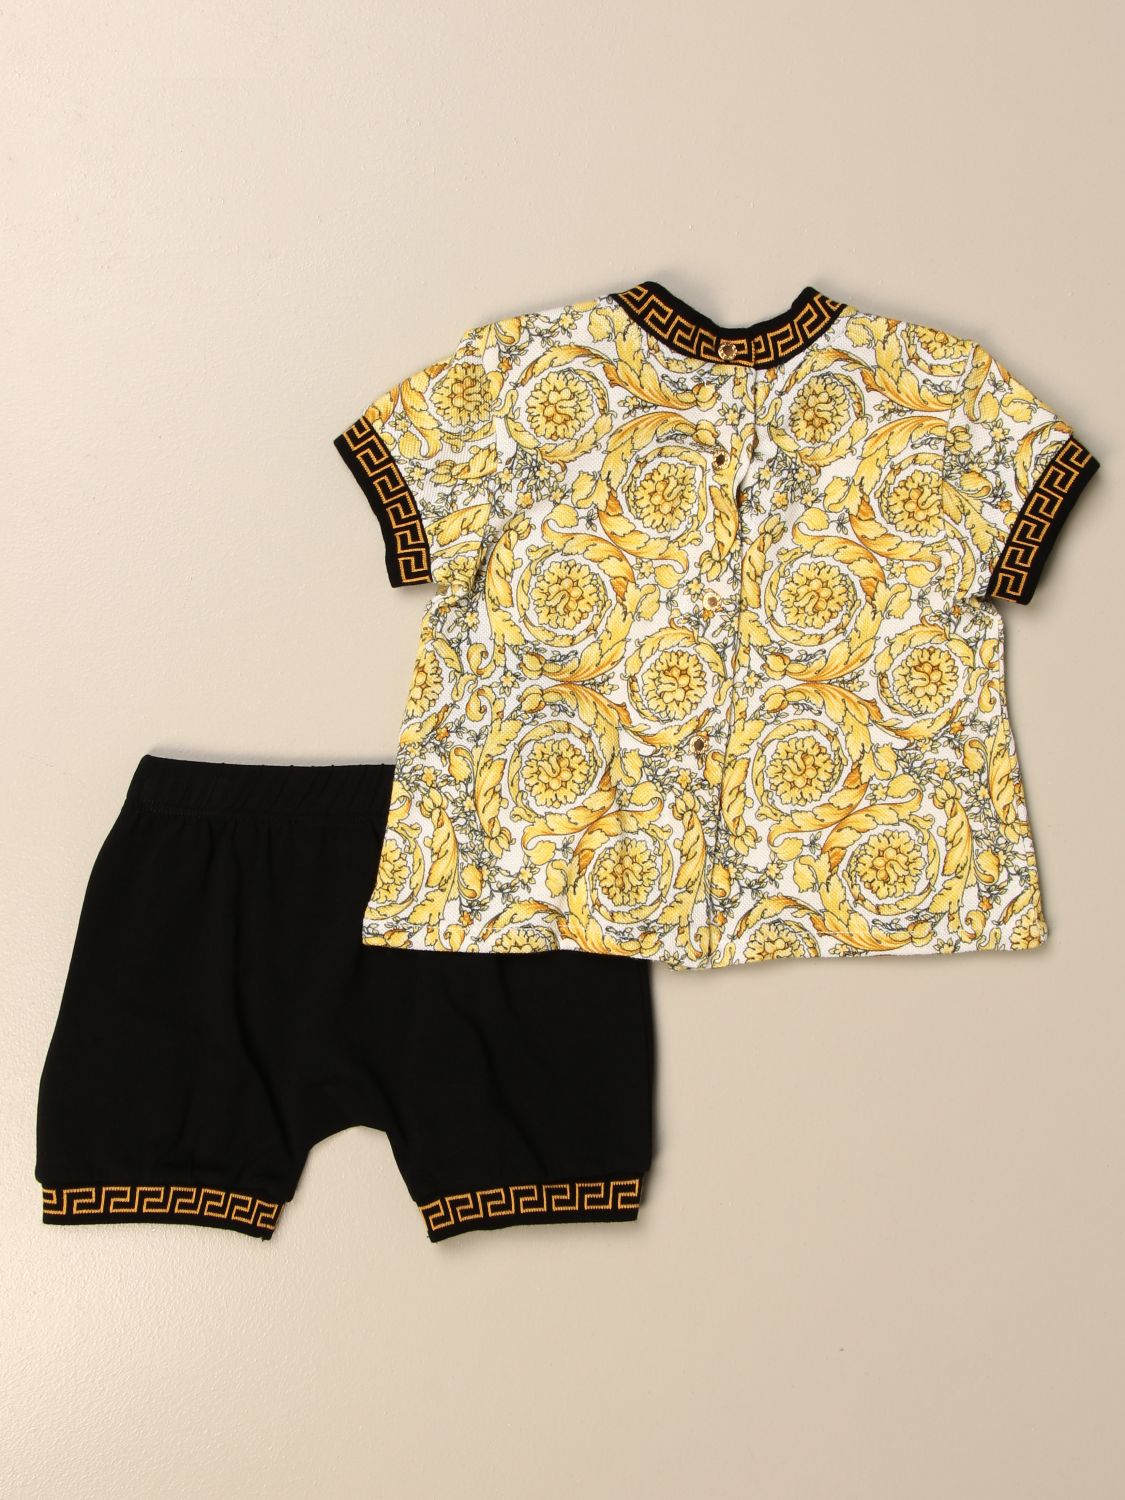 YOUNG VERSACE: Versace Young t-shirt + 